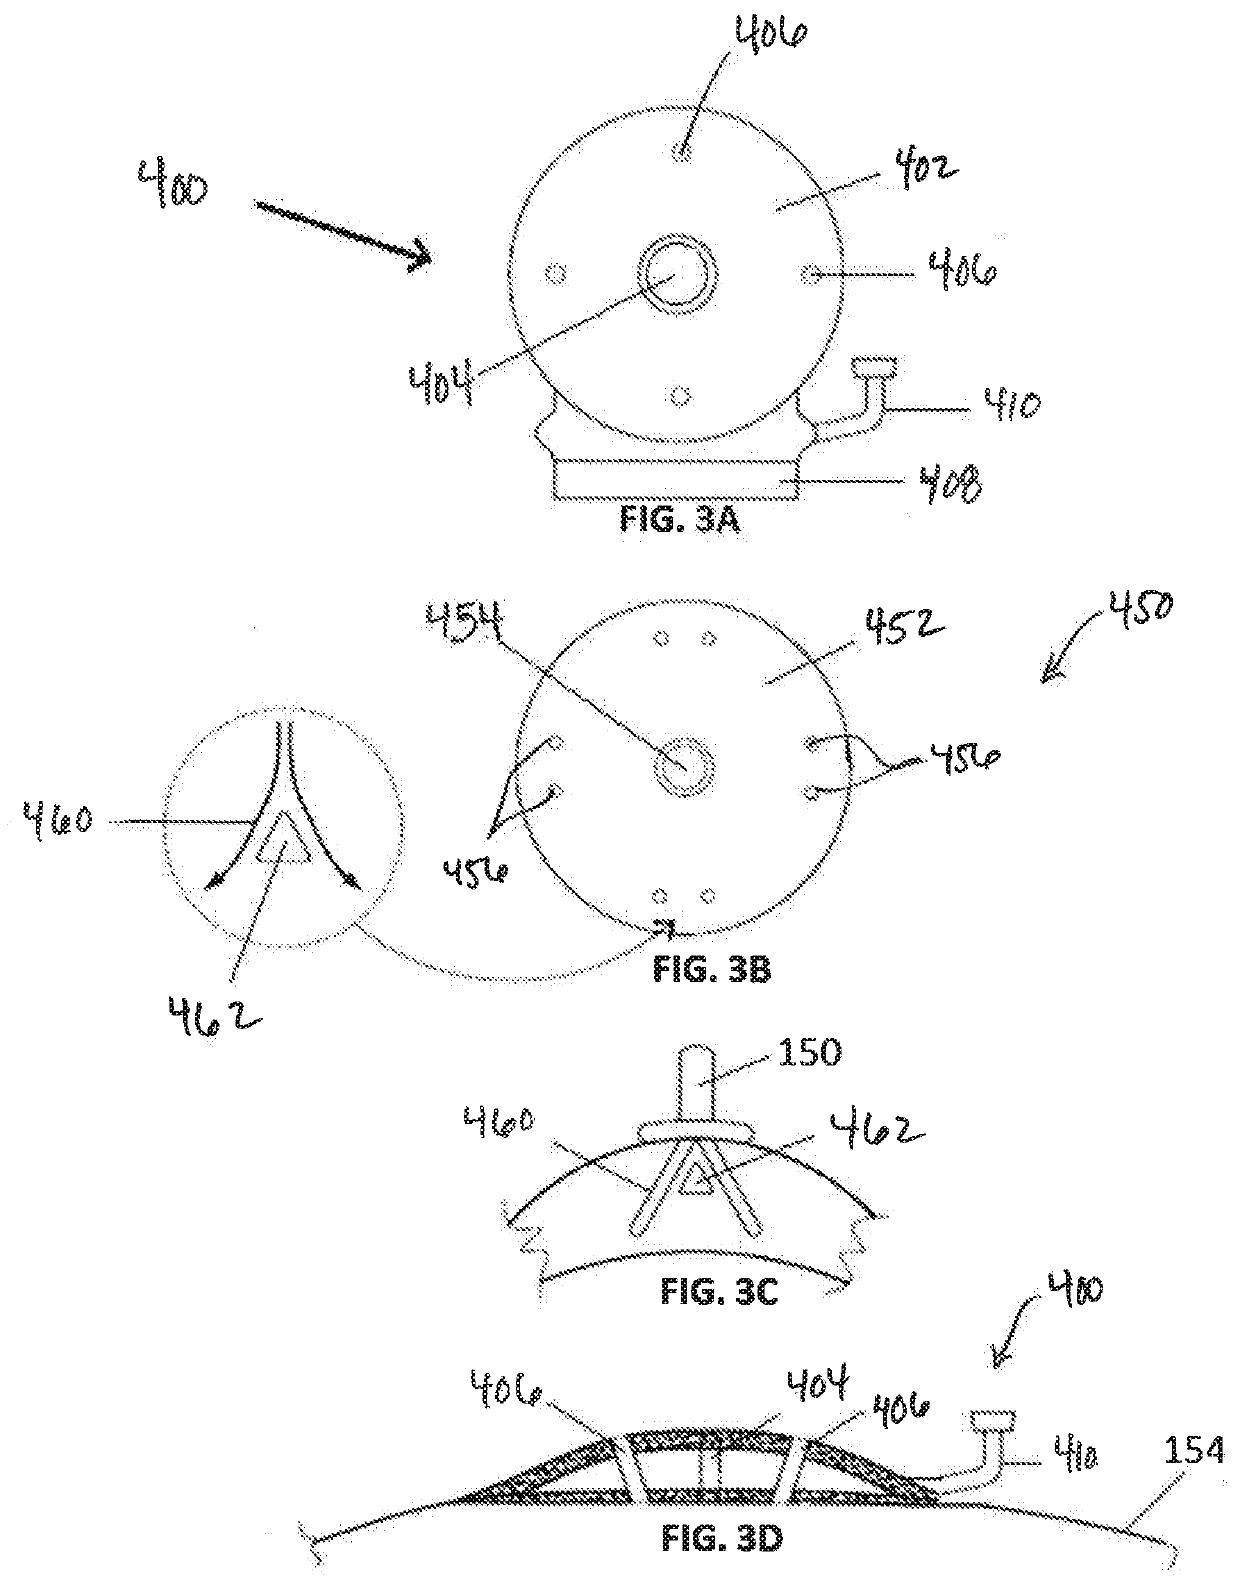 Double needle system to facilitate placing abdominal wall nerve blocks or infusion catheters